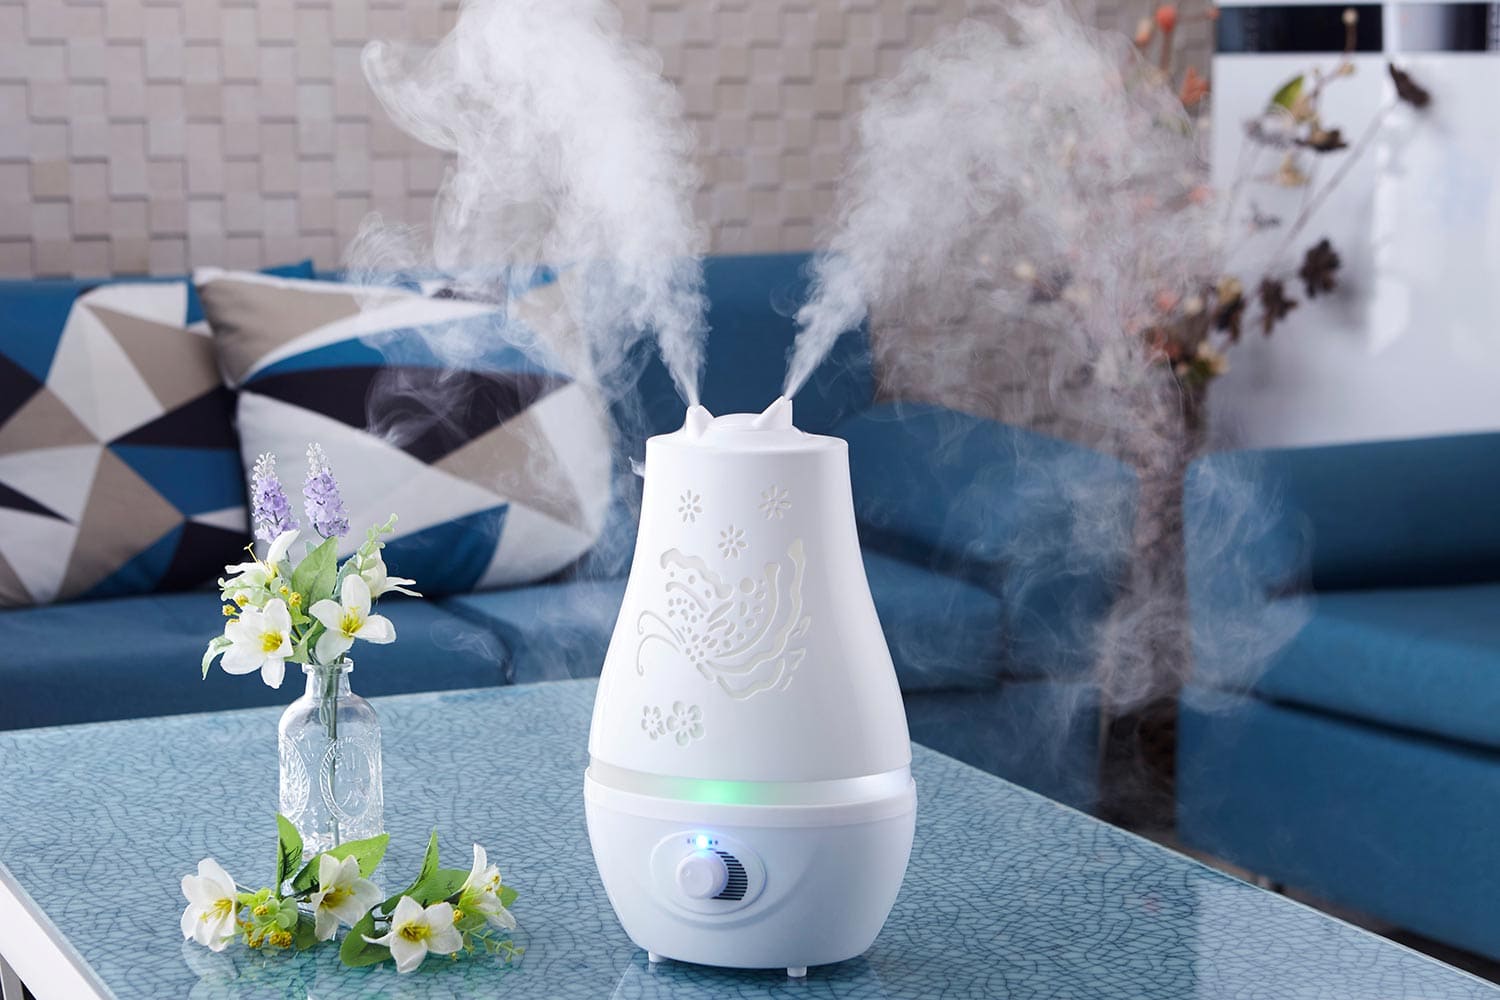 Humidifier on the table